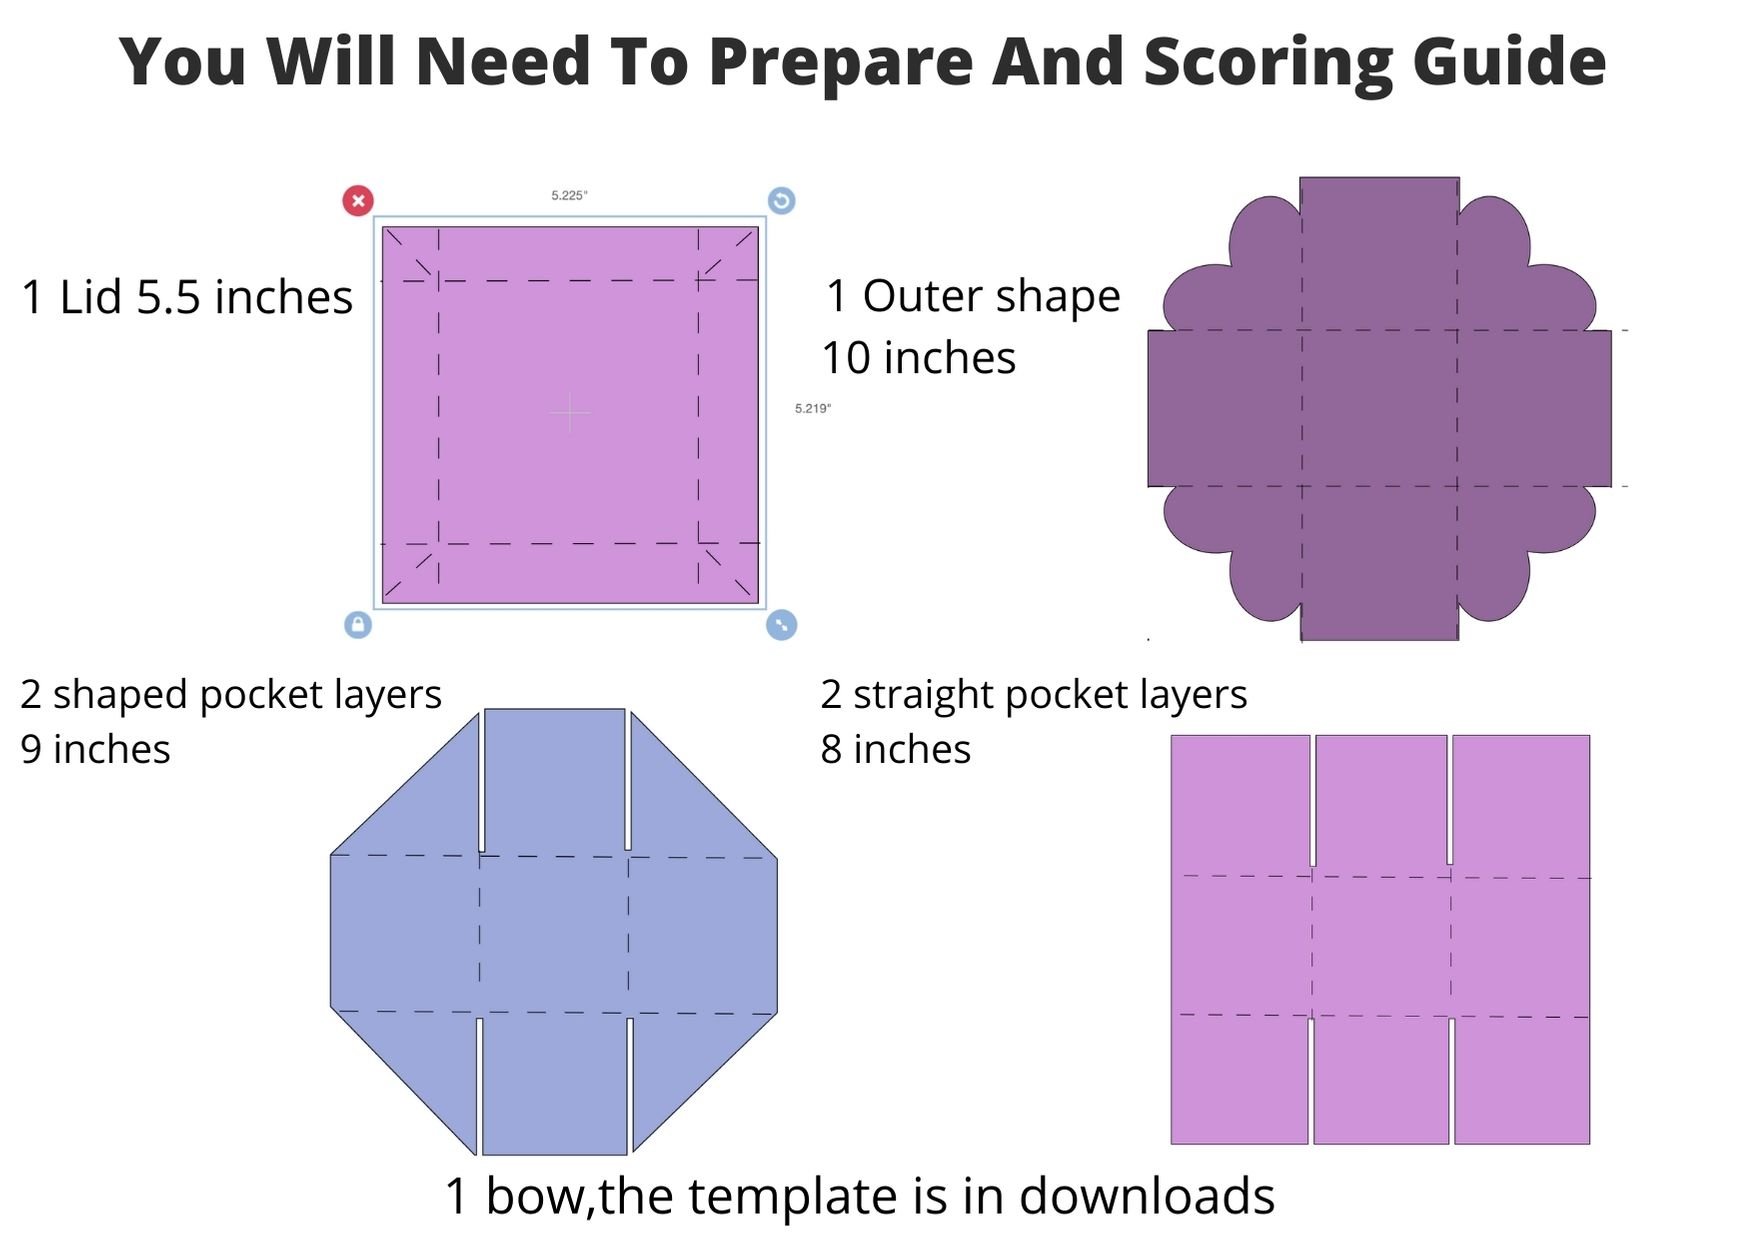 You will need to prepare and scoring guide for an explosion box